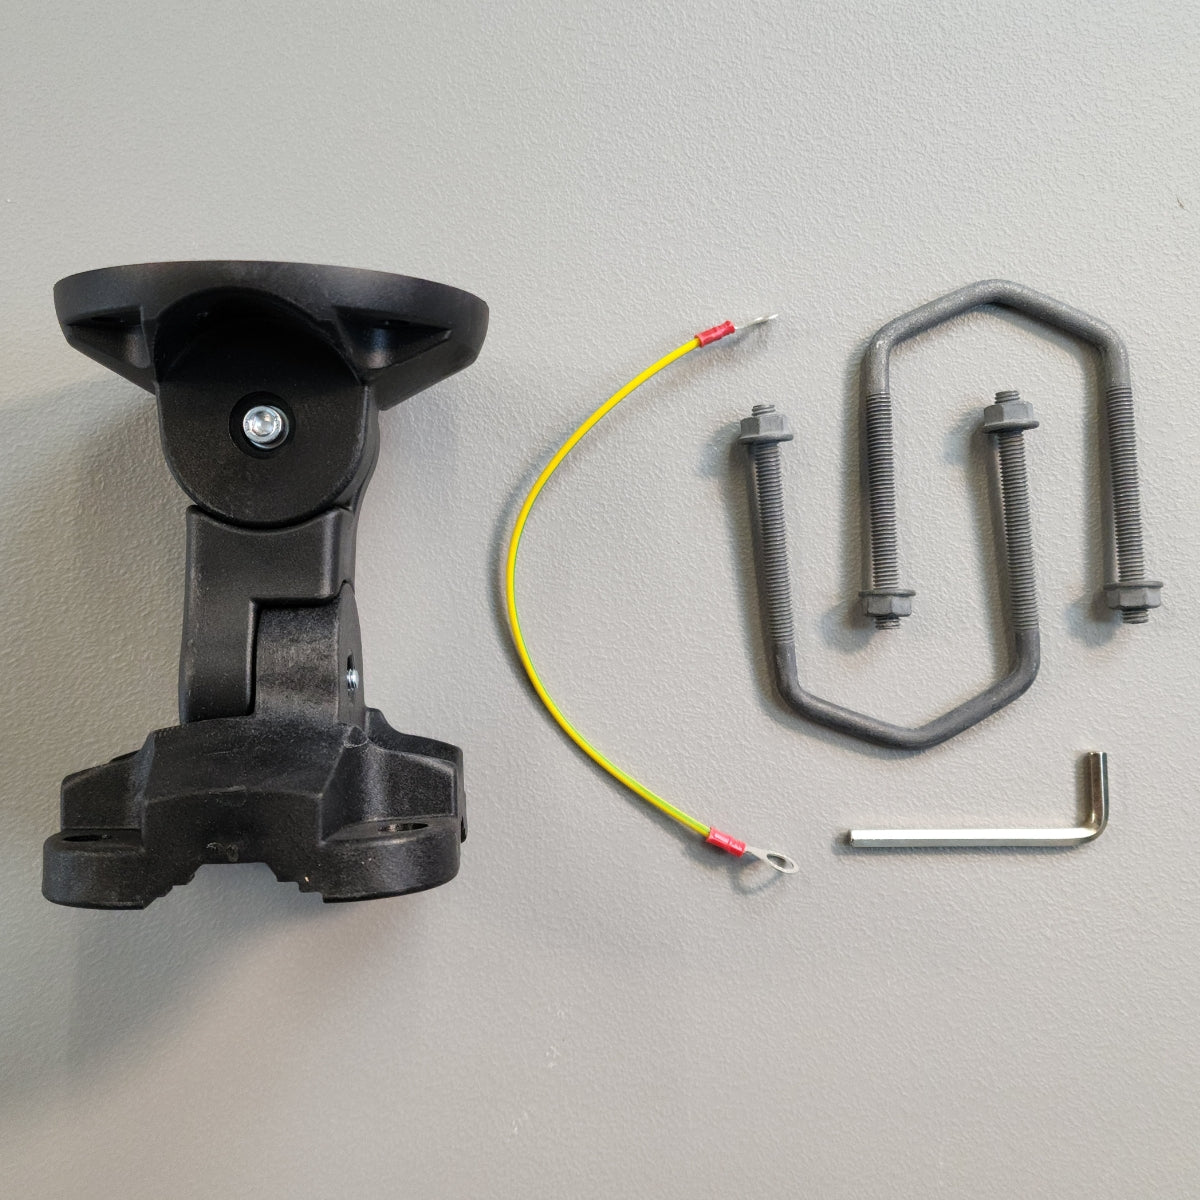 WiSecure Antenna and Enclosure Mounting System